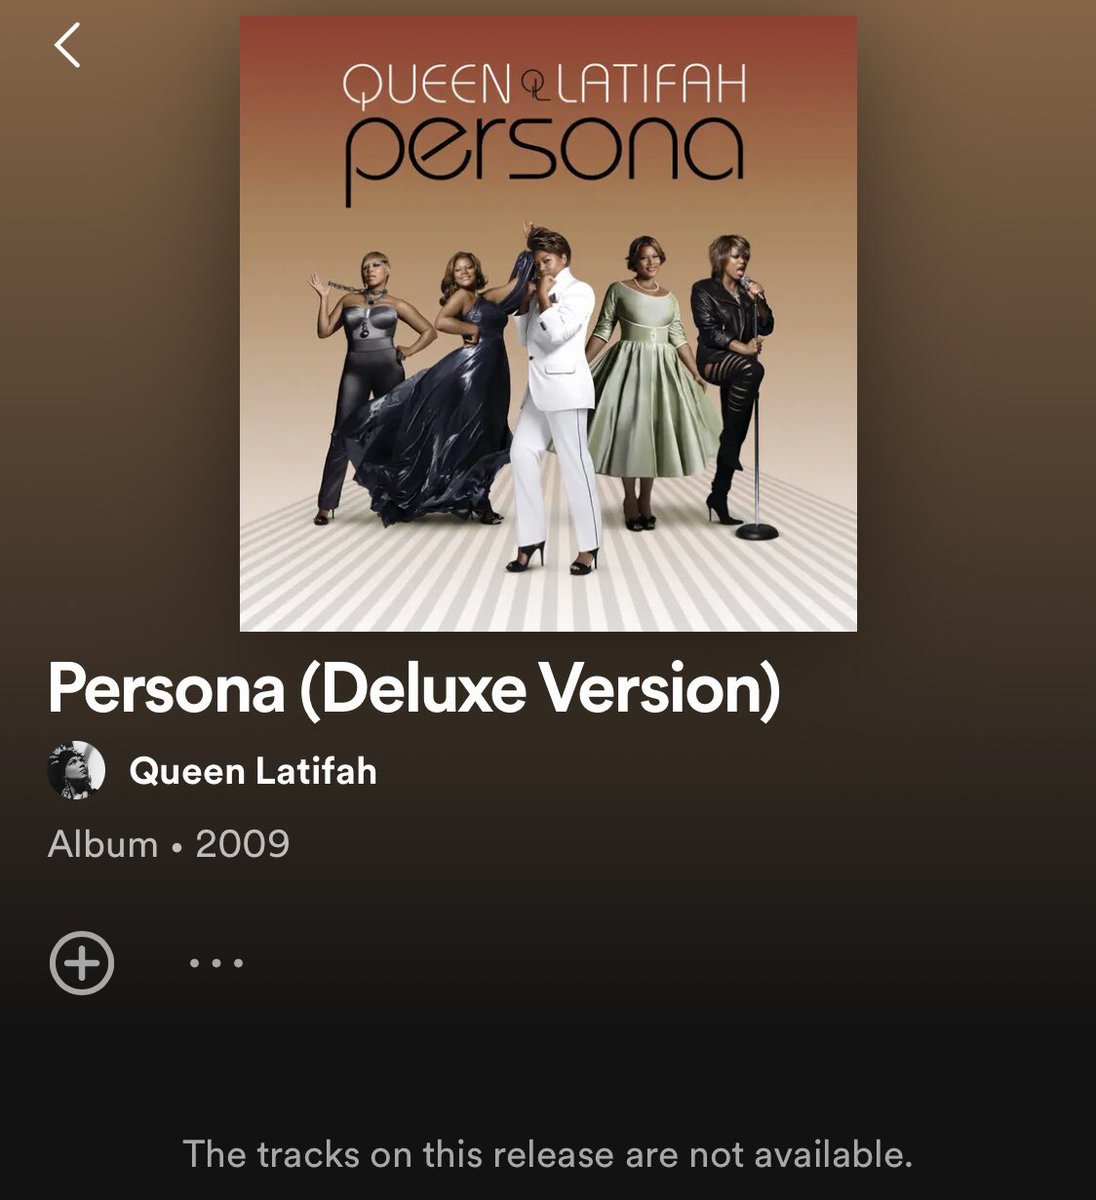 Repost this if you want “Persona (Deluxe Version)” by @IAMQUEENLATIFAH to be made available on streaming platforms worldwide 🌎 Includes guest appearances by @maryjblige @BustaRhymes @MissyElliott & more… 🎤 @COOLANDDRE @UMG #music #hiphop #RnB #Album #2000s #woman #female 🎶